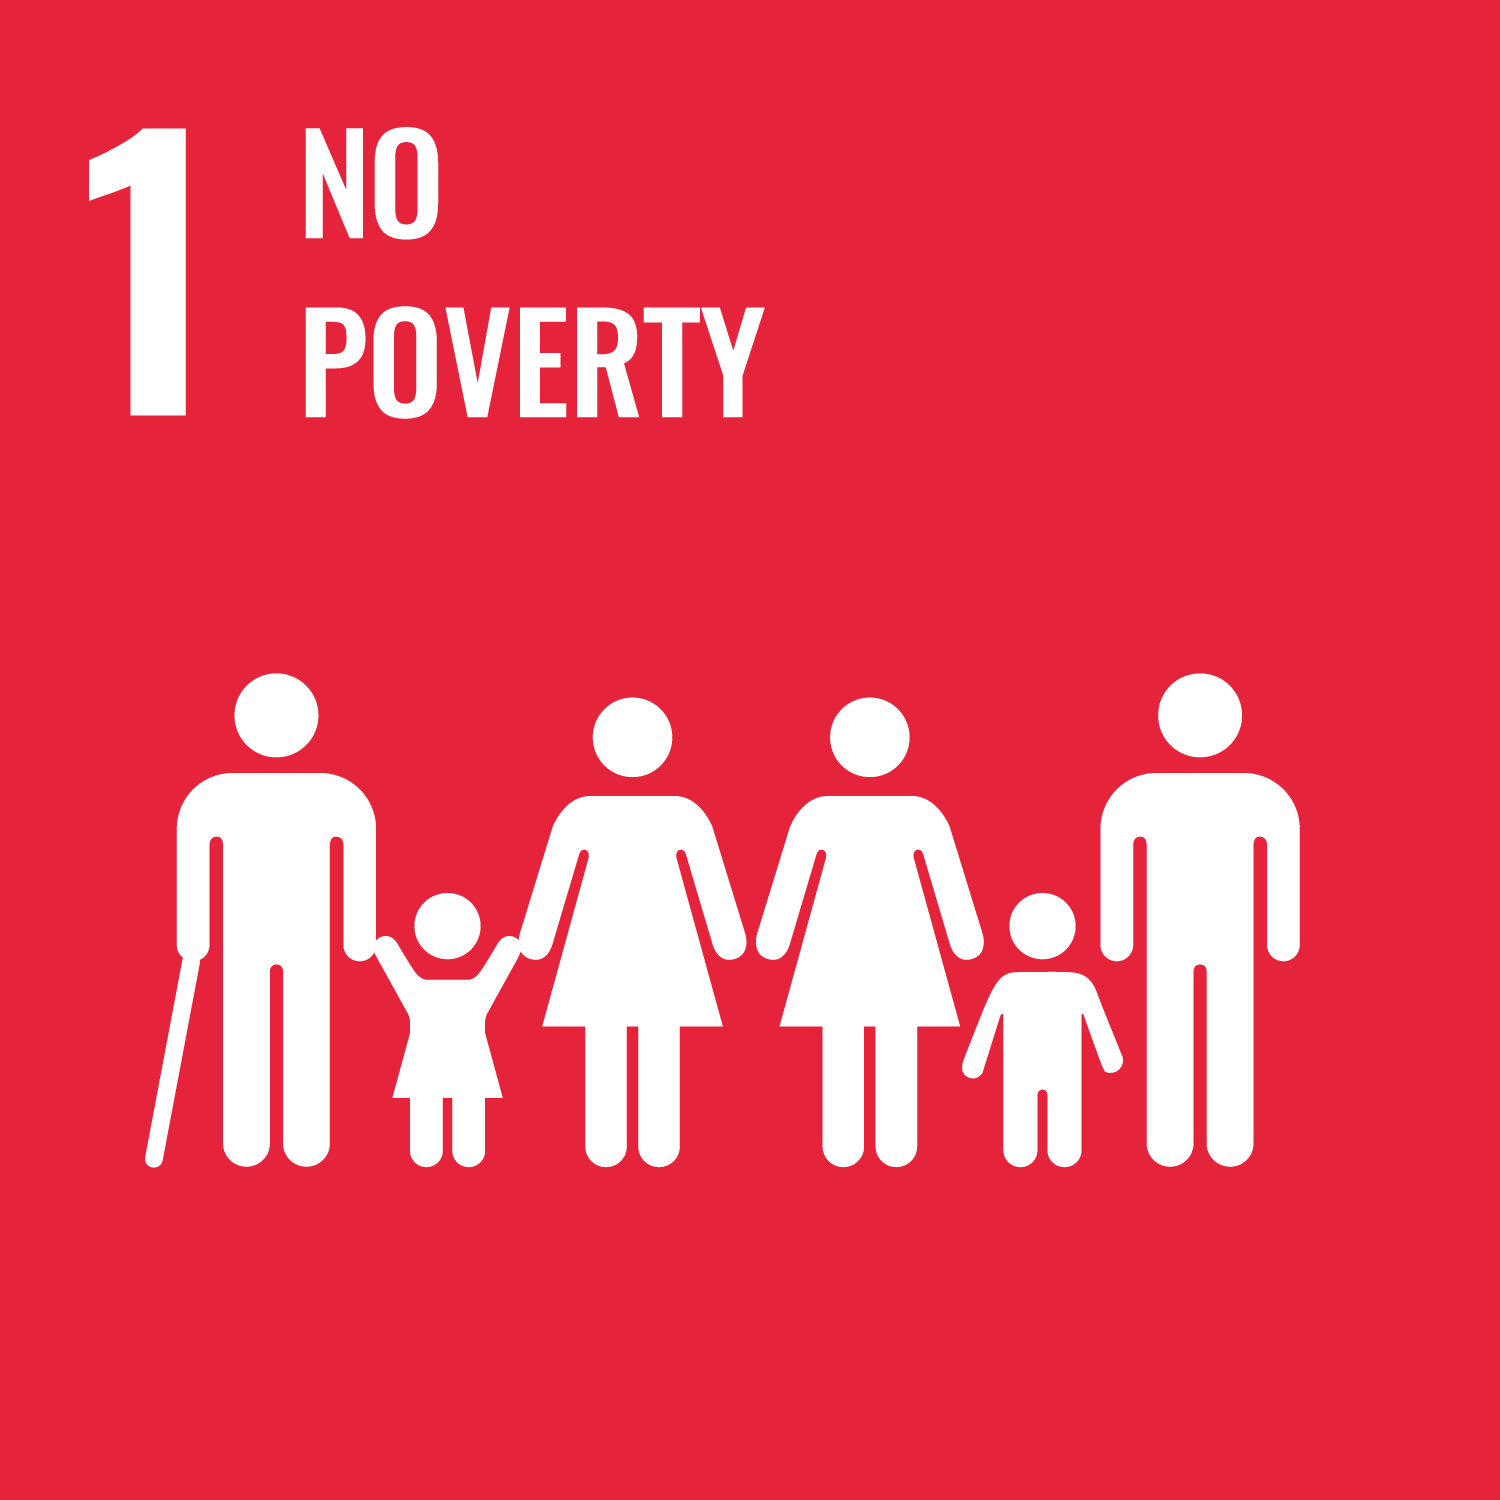 On a red background, white text reads "1. No Poverty". Beneath this is an illustration of a family. 